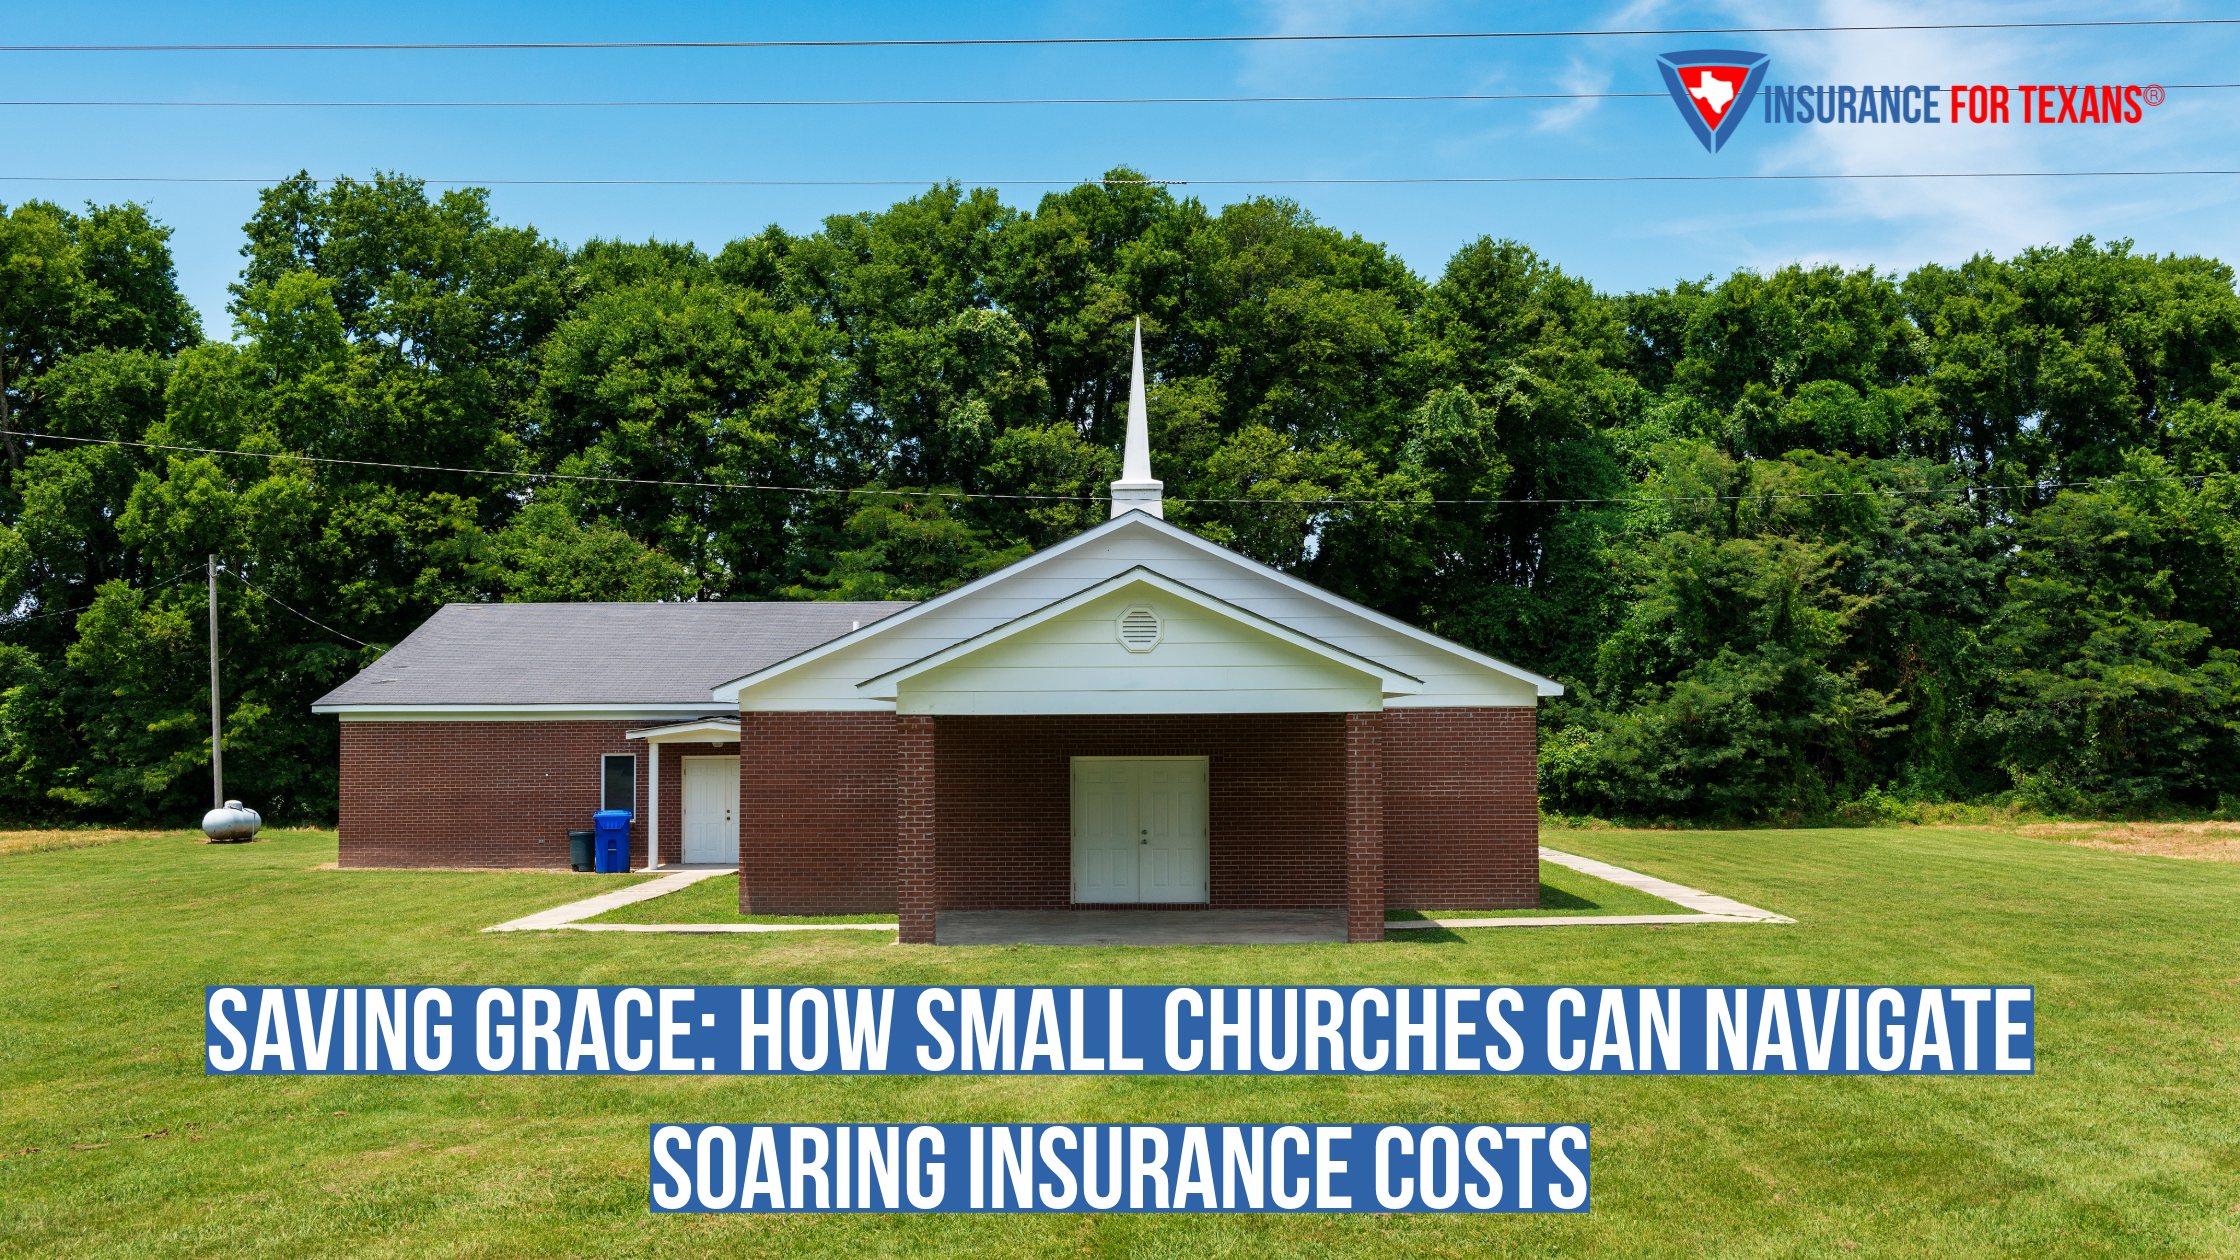 Saving Grace: How Small Churches Can Navigate Soaring Insurance Costs